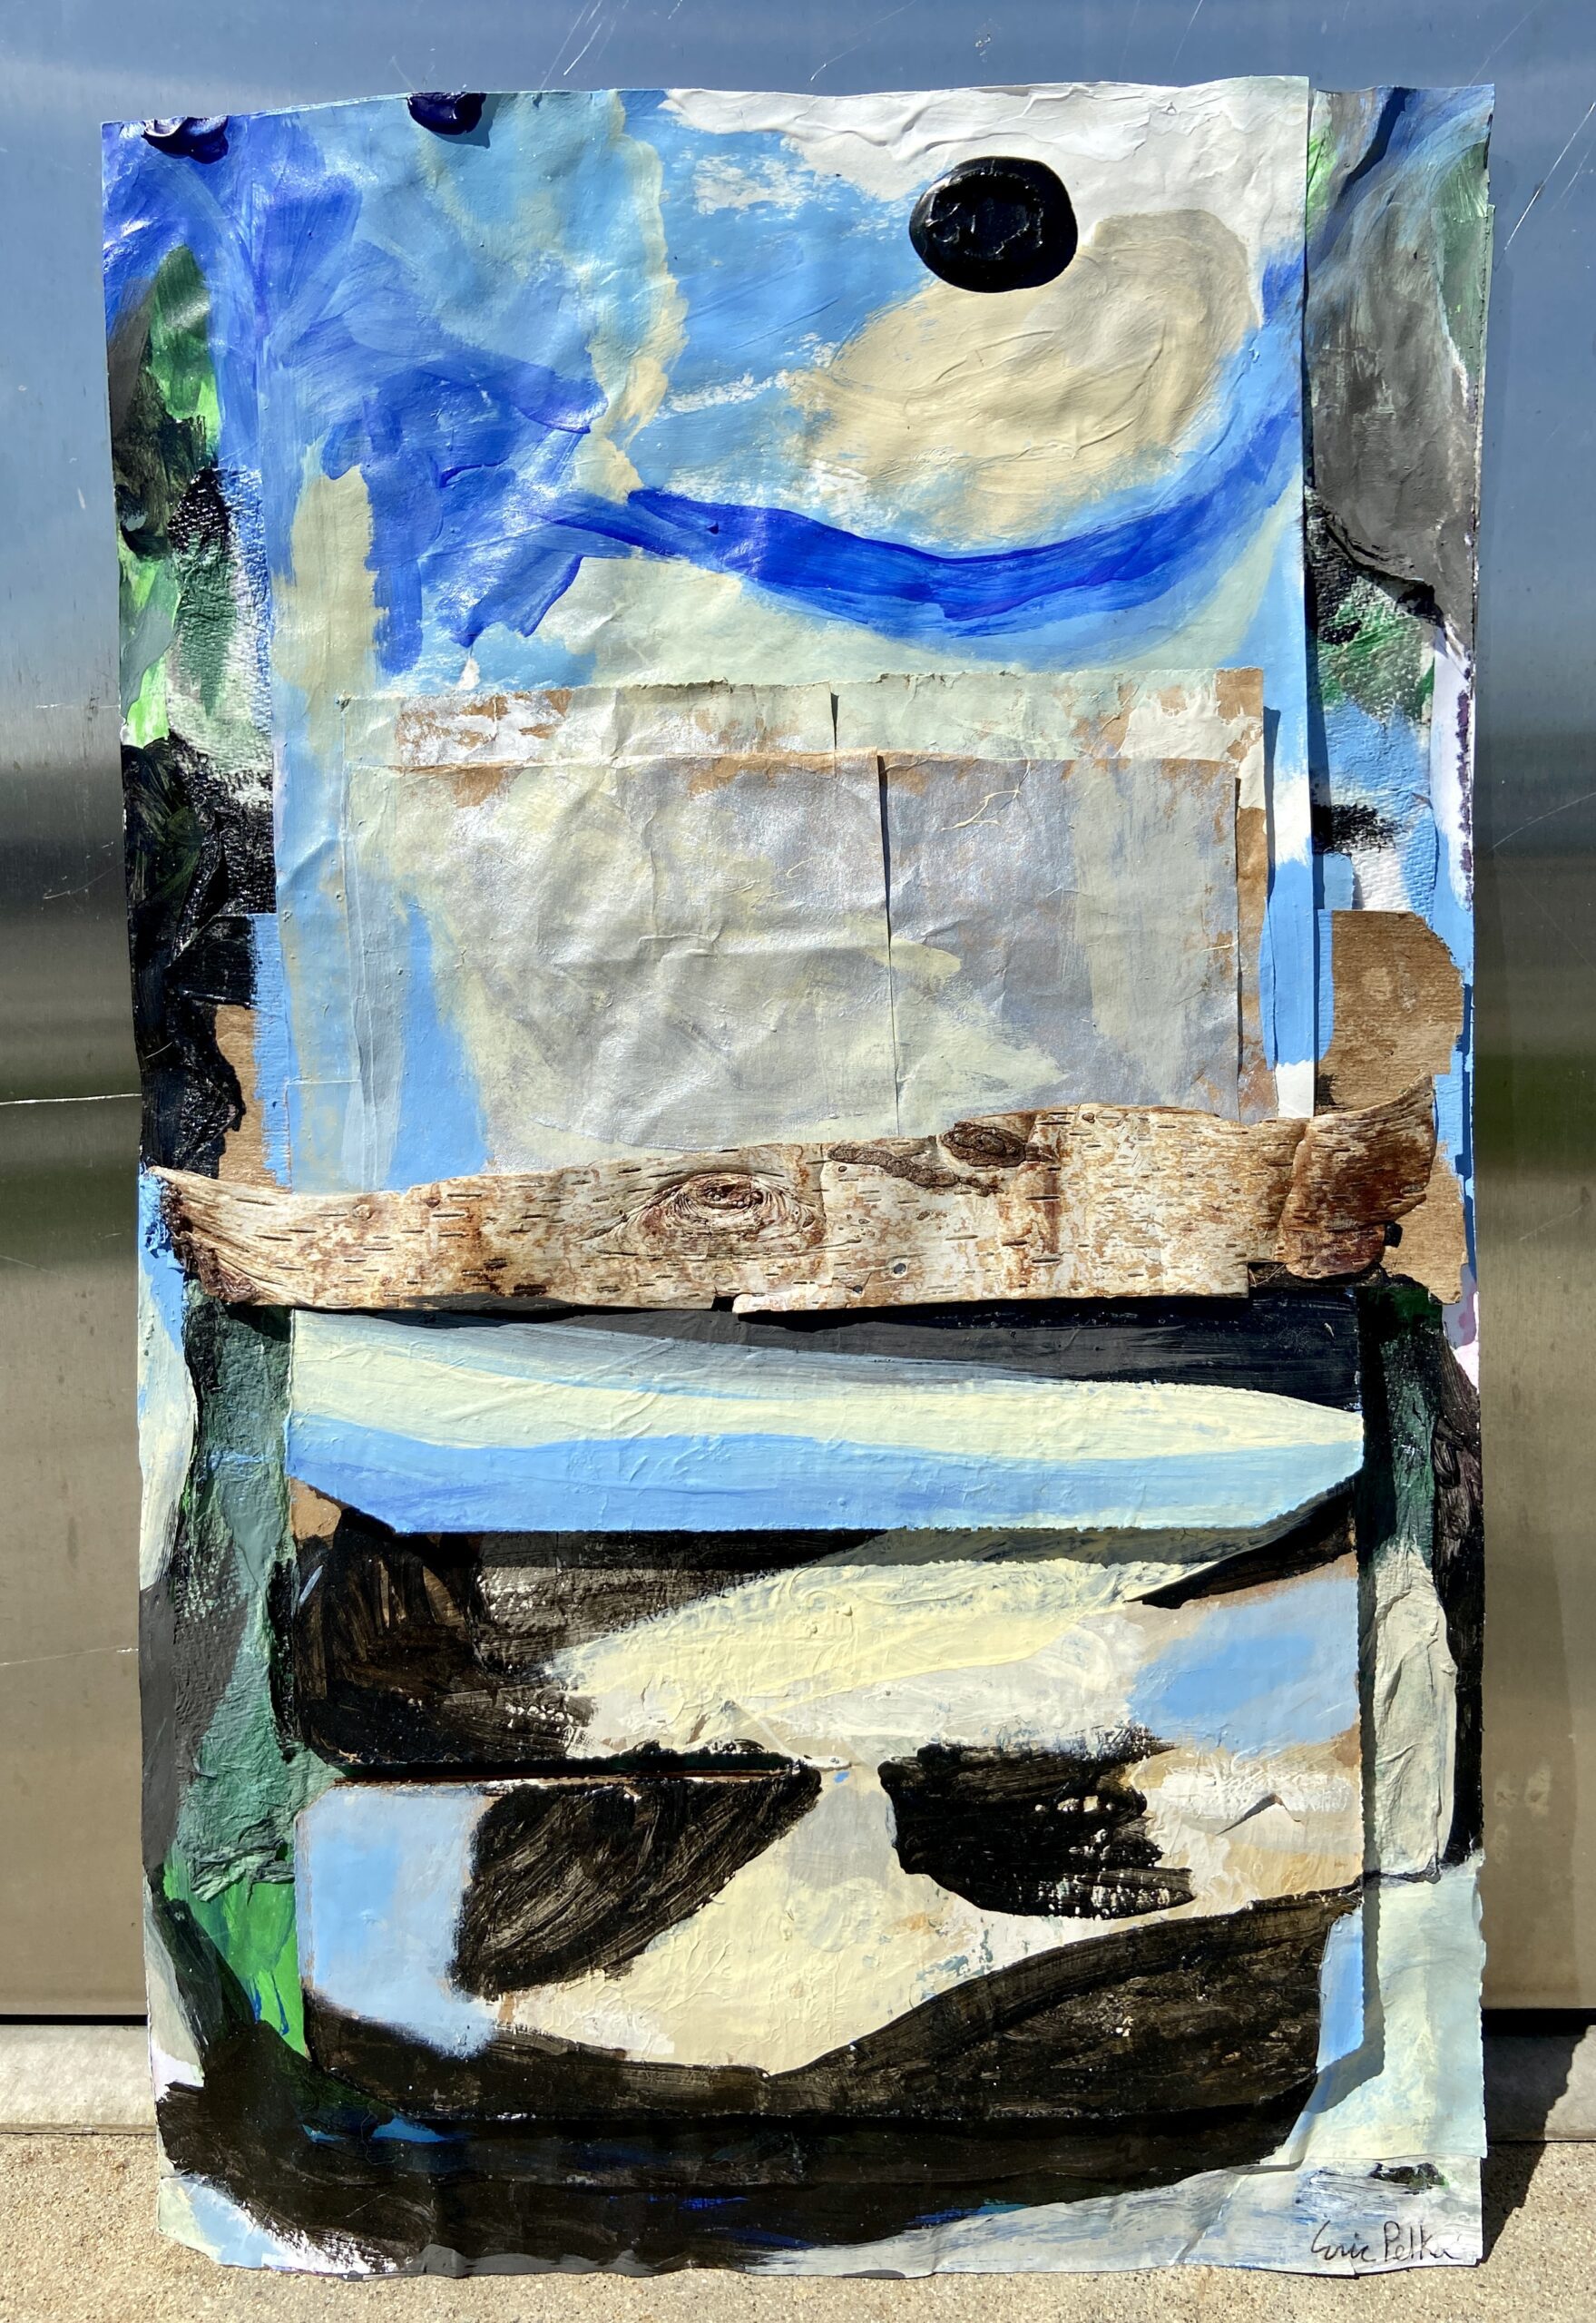 A river that flows across pebbles, 2022 19 x 12 inches acrylic tempera painting collage with cardboard and birch bark mounted on layered paper